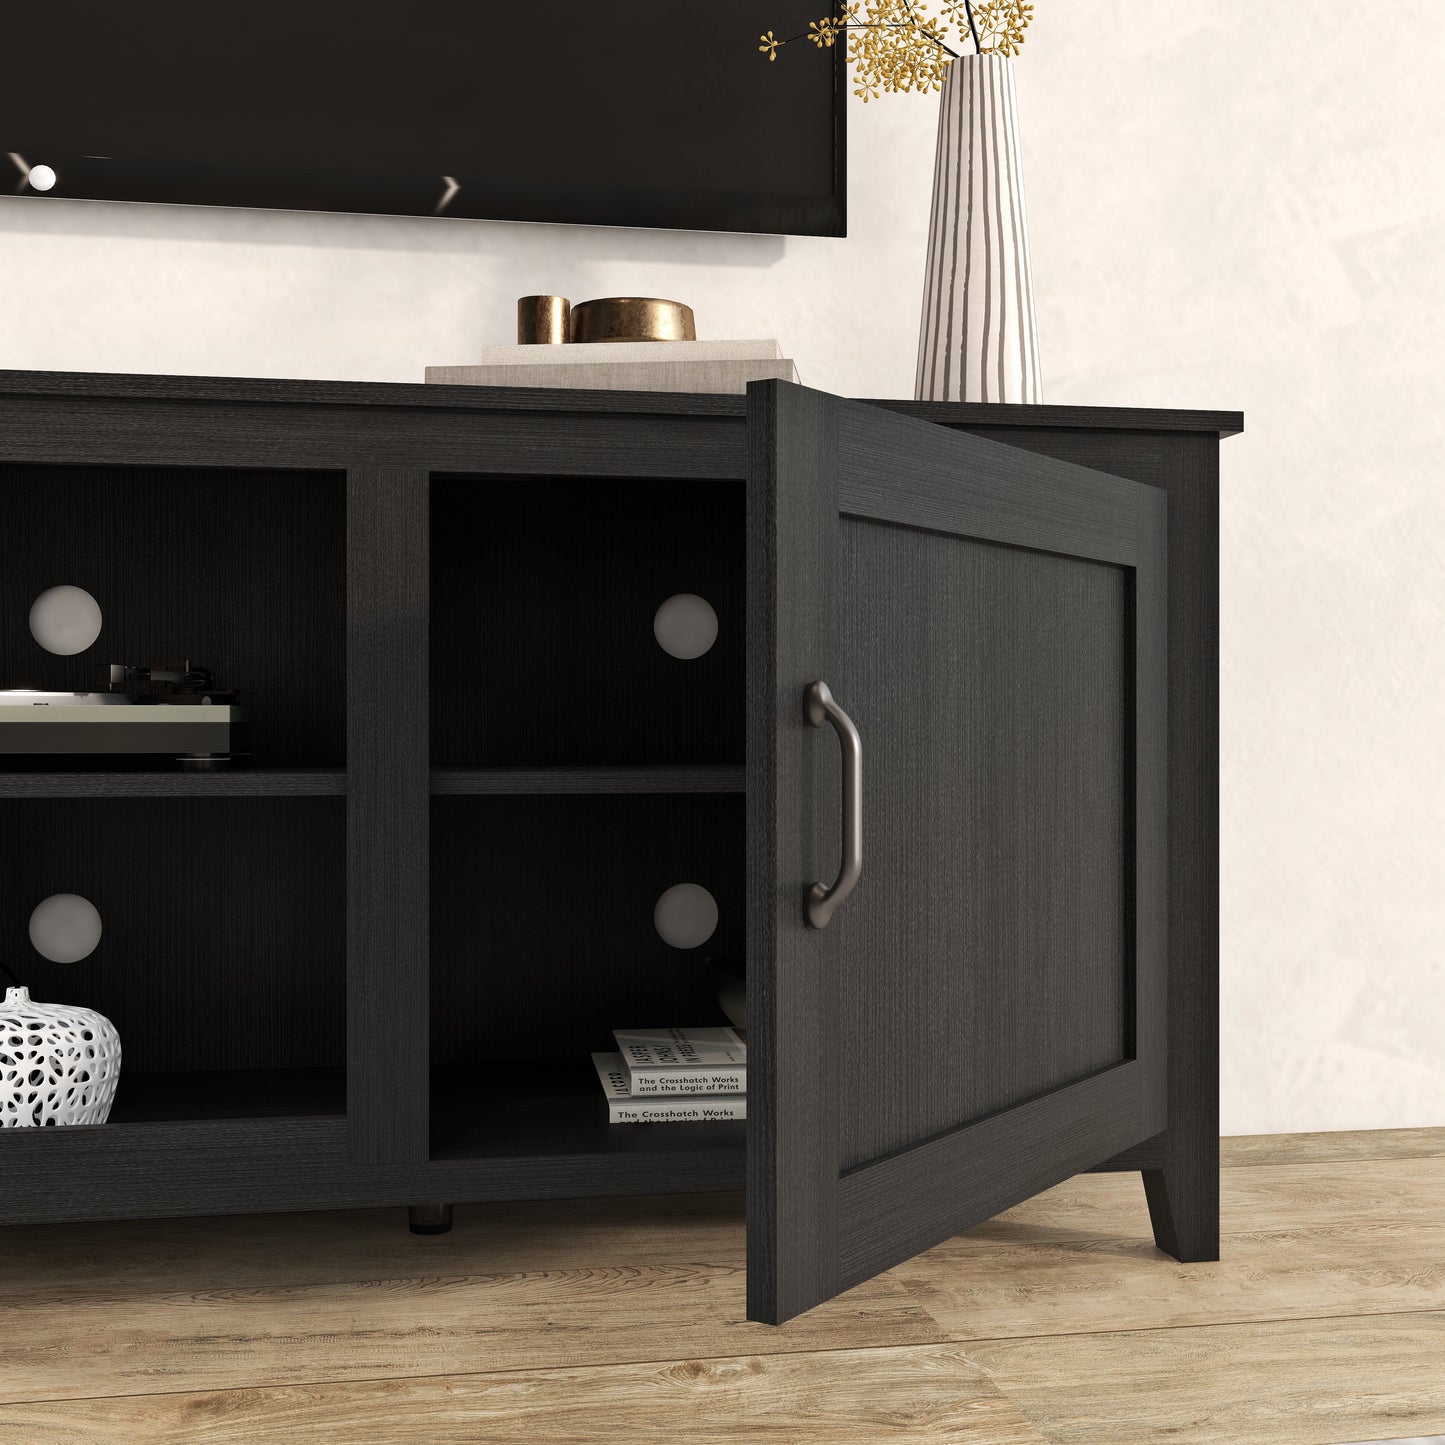 TV Stand Storage Media Console Entertainment Center; Tradition Black; with doors